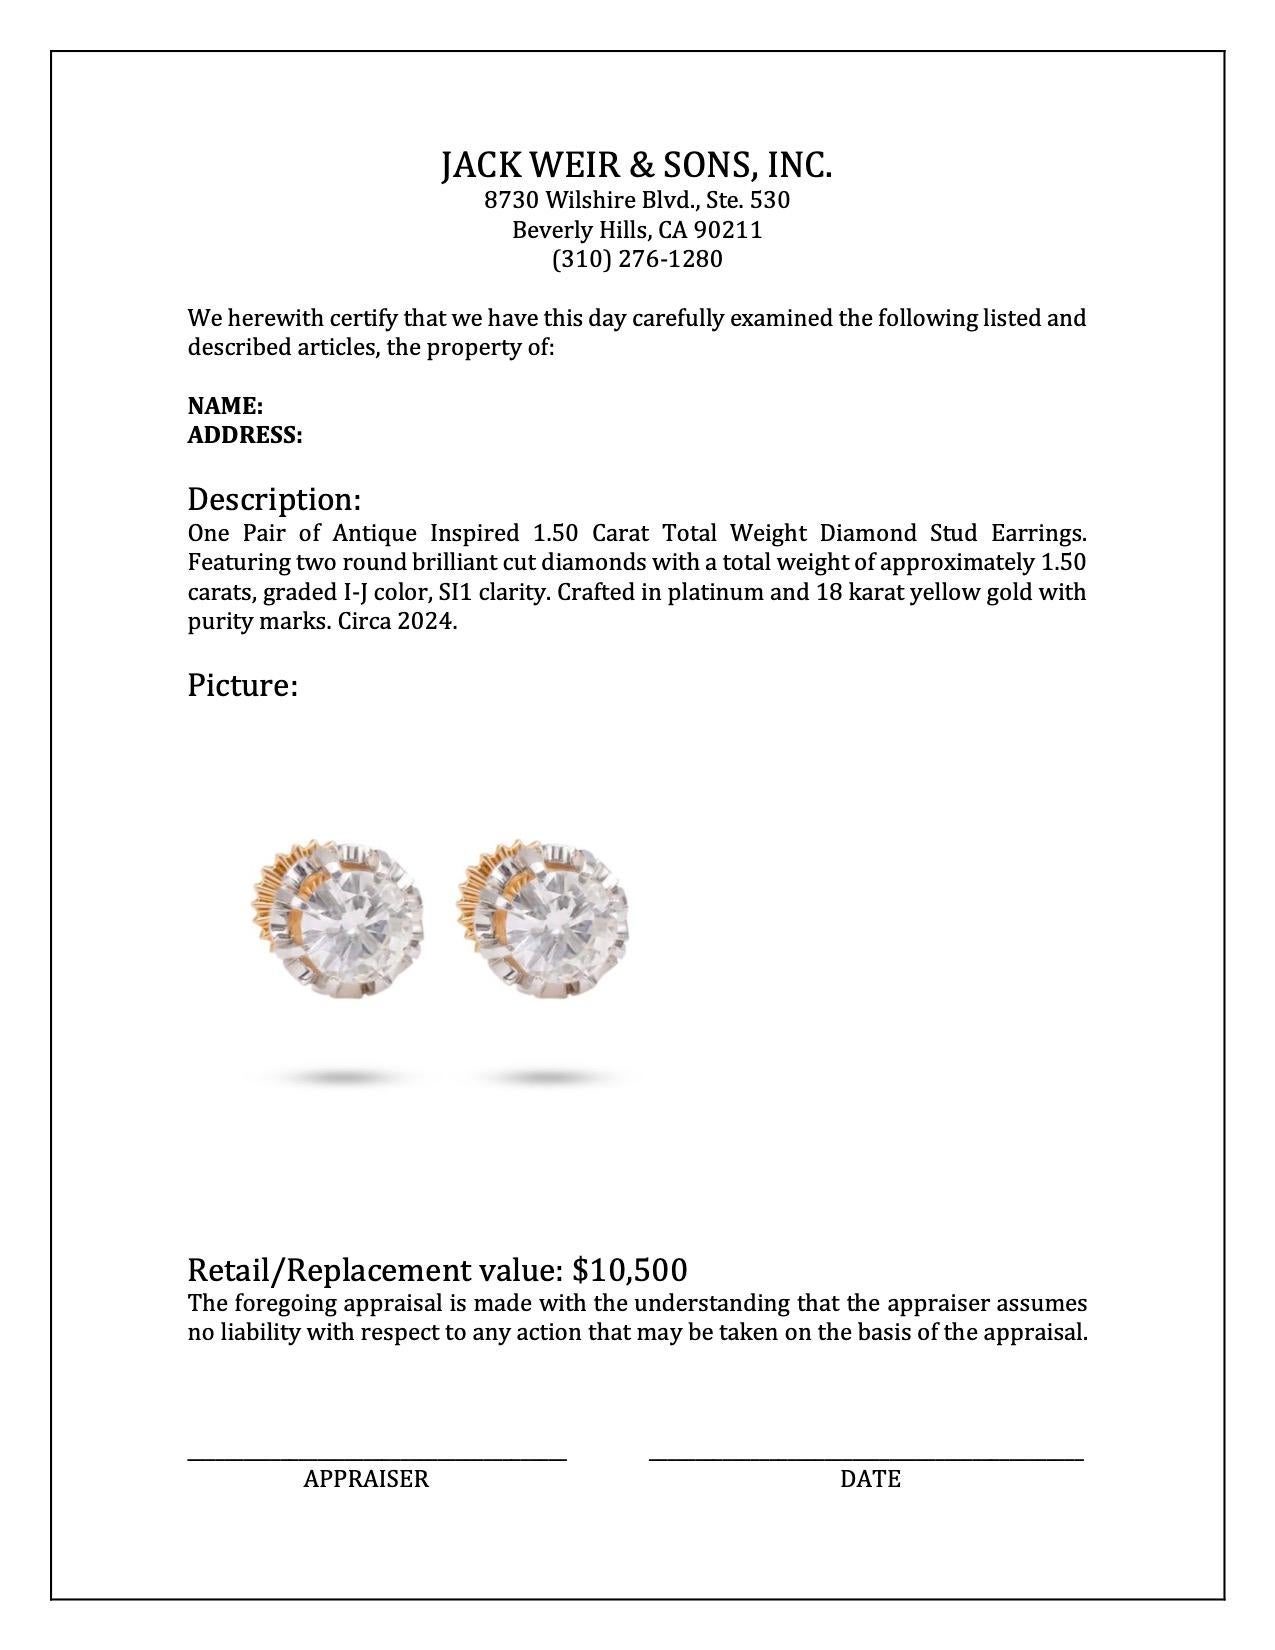 Antique Inspired 1.50 Carat Total Weight Diamond Stud Earrings In Excellent Condition For Sale In Beverly Hills, CA